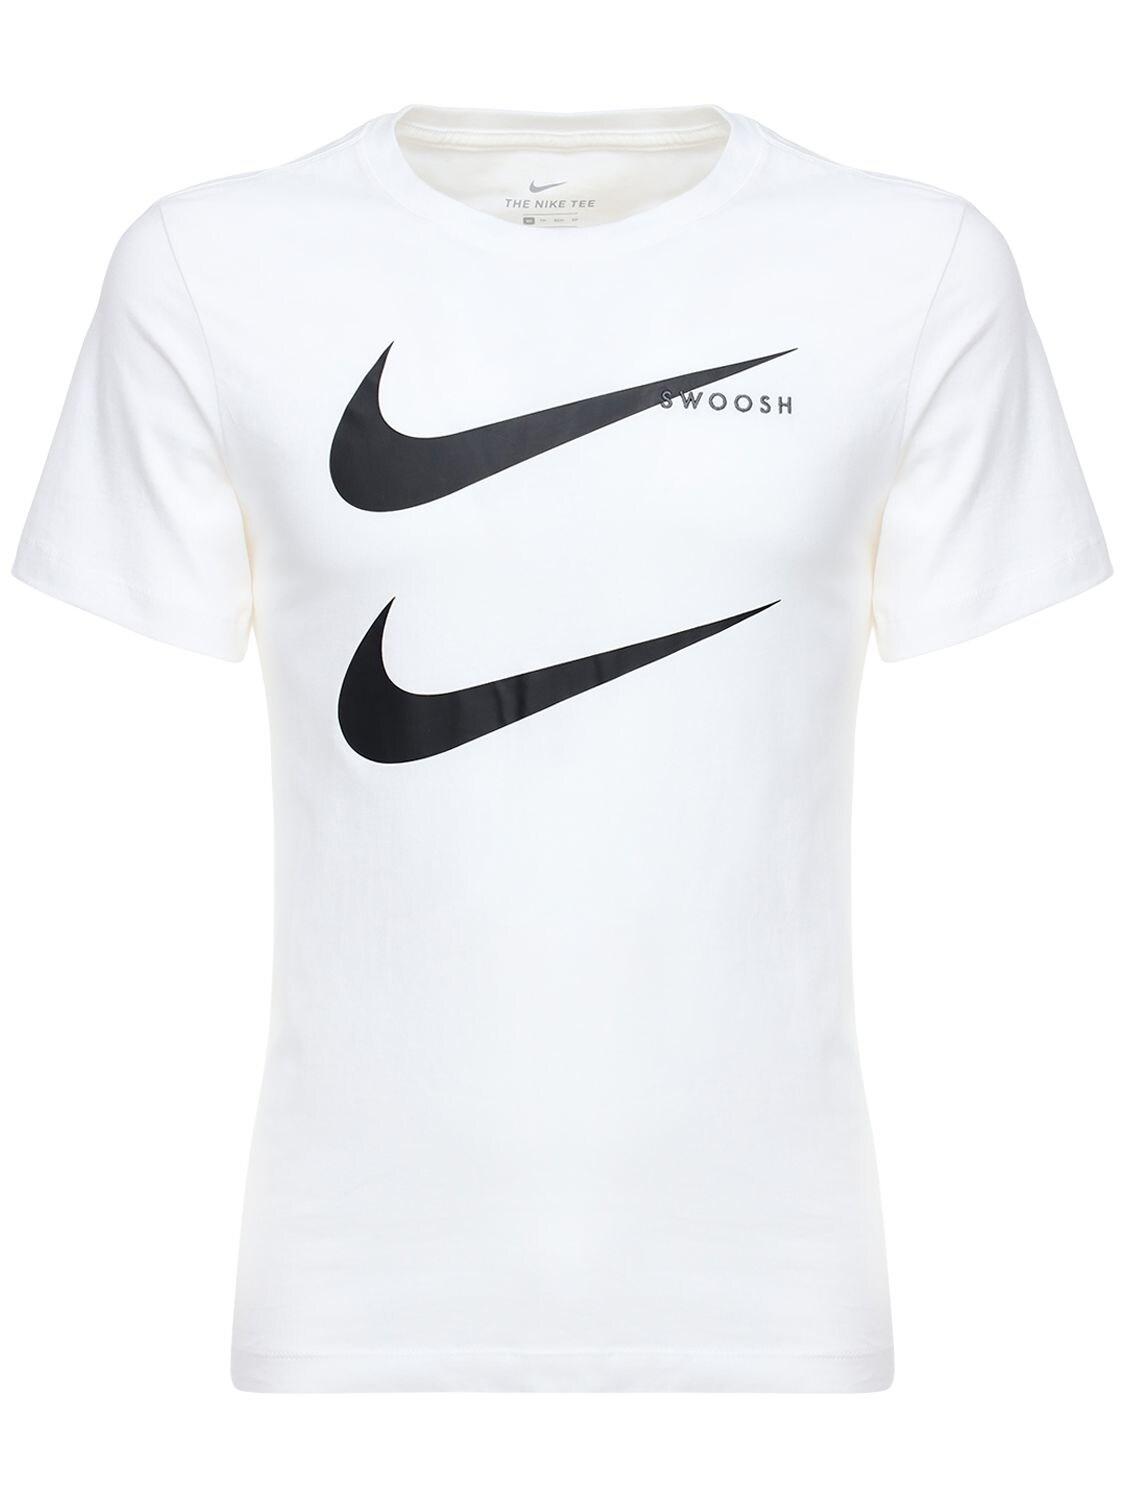 Nike Double Swoosh Cotton T-shirt in White for Men | Lyst